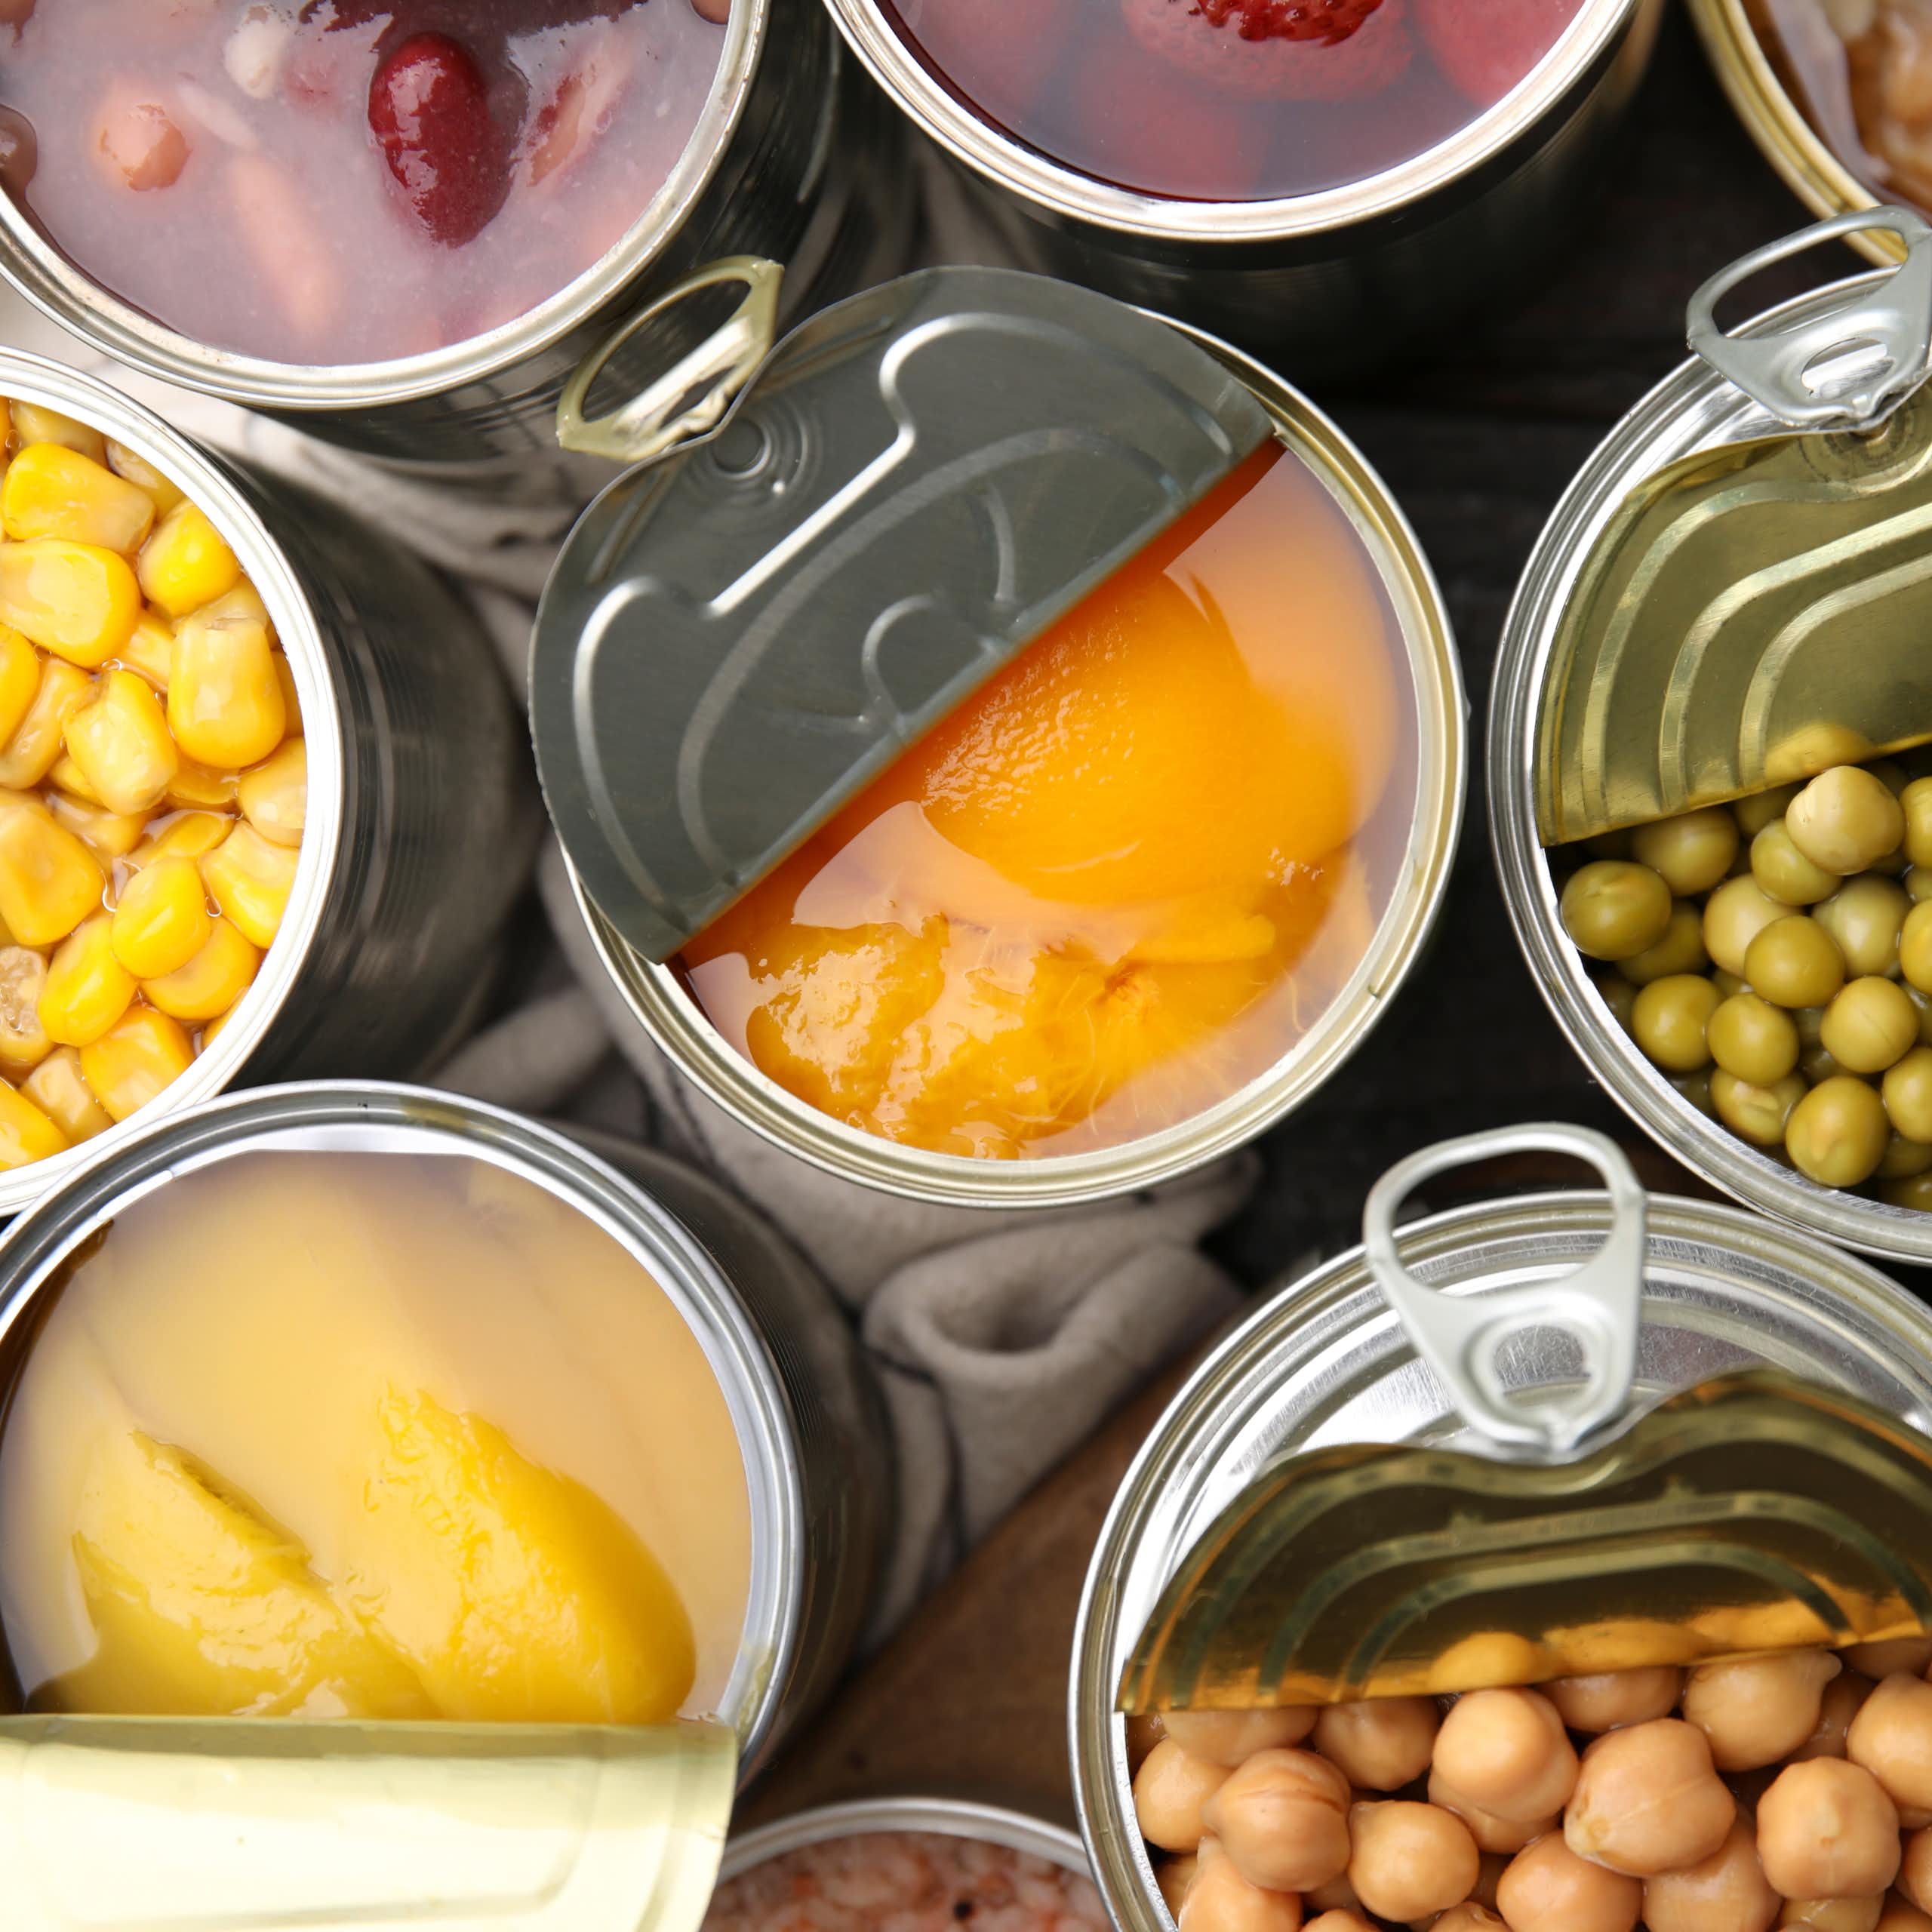 Cost of living: if you can’t afford as much fresh produce, are canned veggies or frozen fruit just as good?